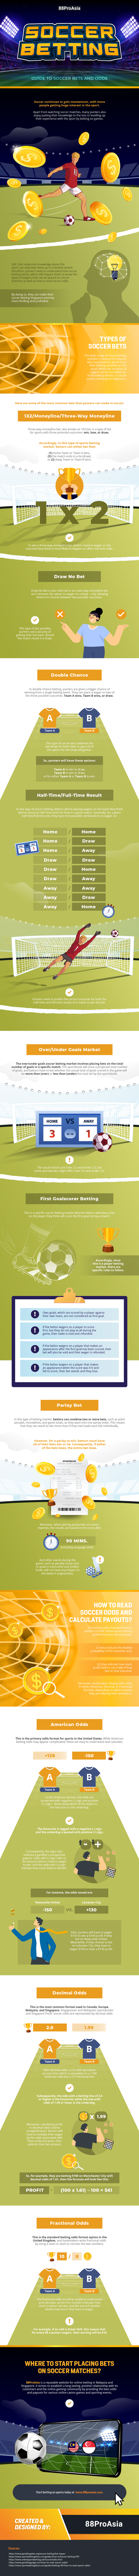 Soccer-Betting-Guide-to-Soccer-Bets-and-Odds-Online-Live-Sports-Sportsbook-Singapore-Malaysia-Infographic